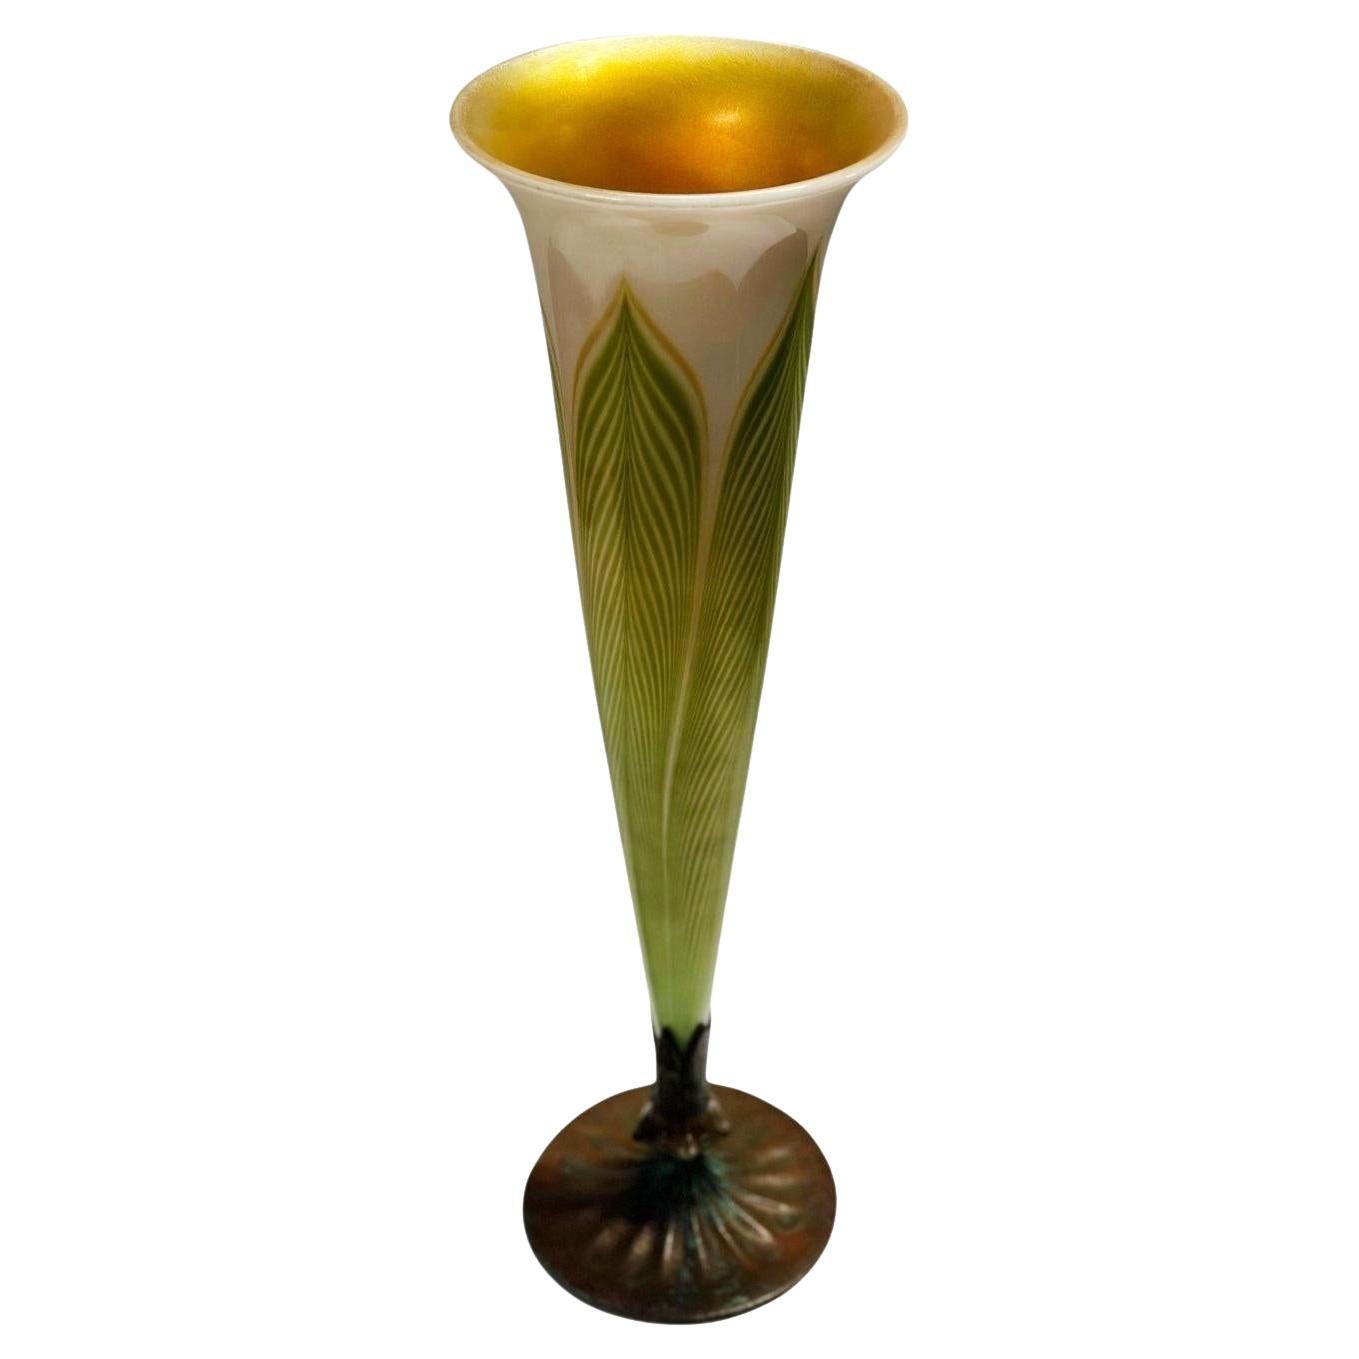 How do I tell if a vase is a Tiffany vase?